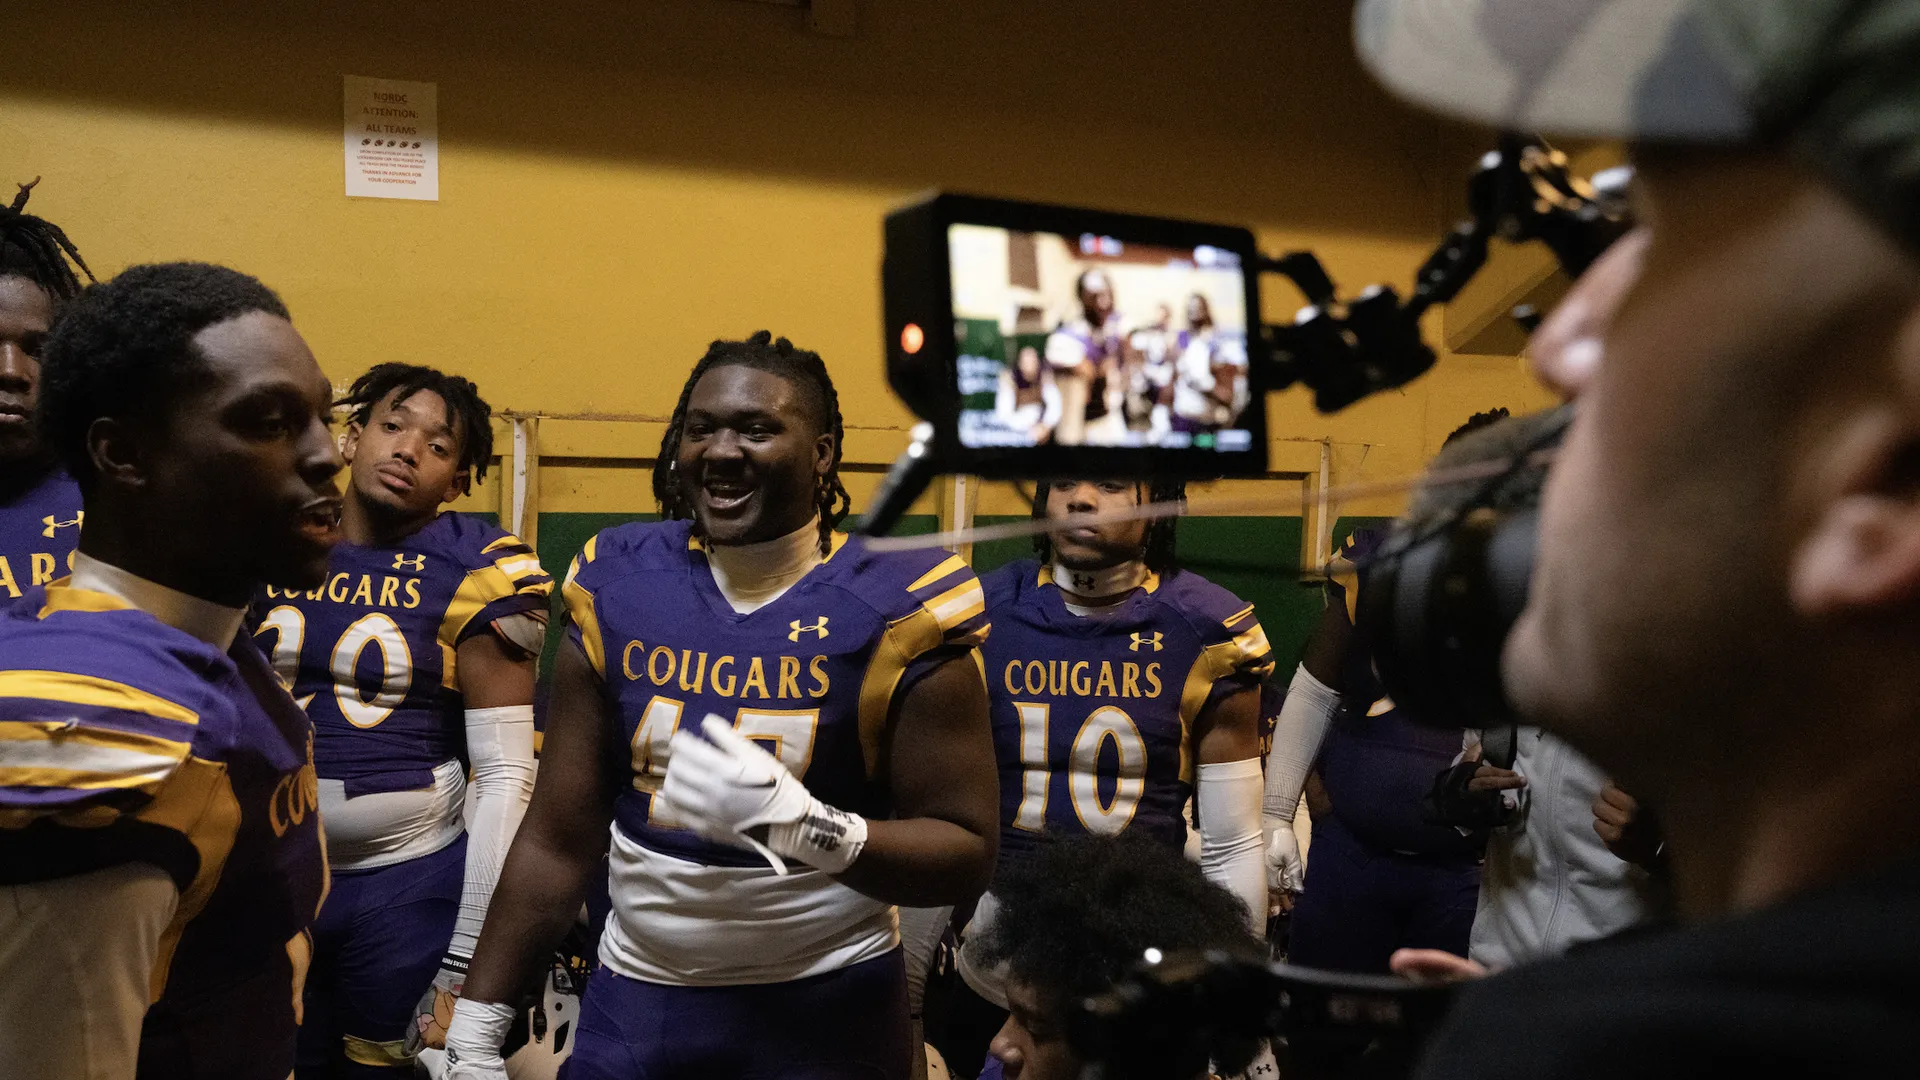 The Edna Karr Cougars in the show, Algiers America